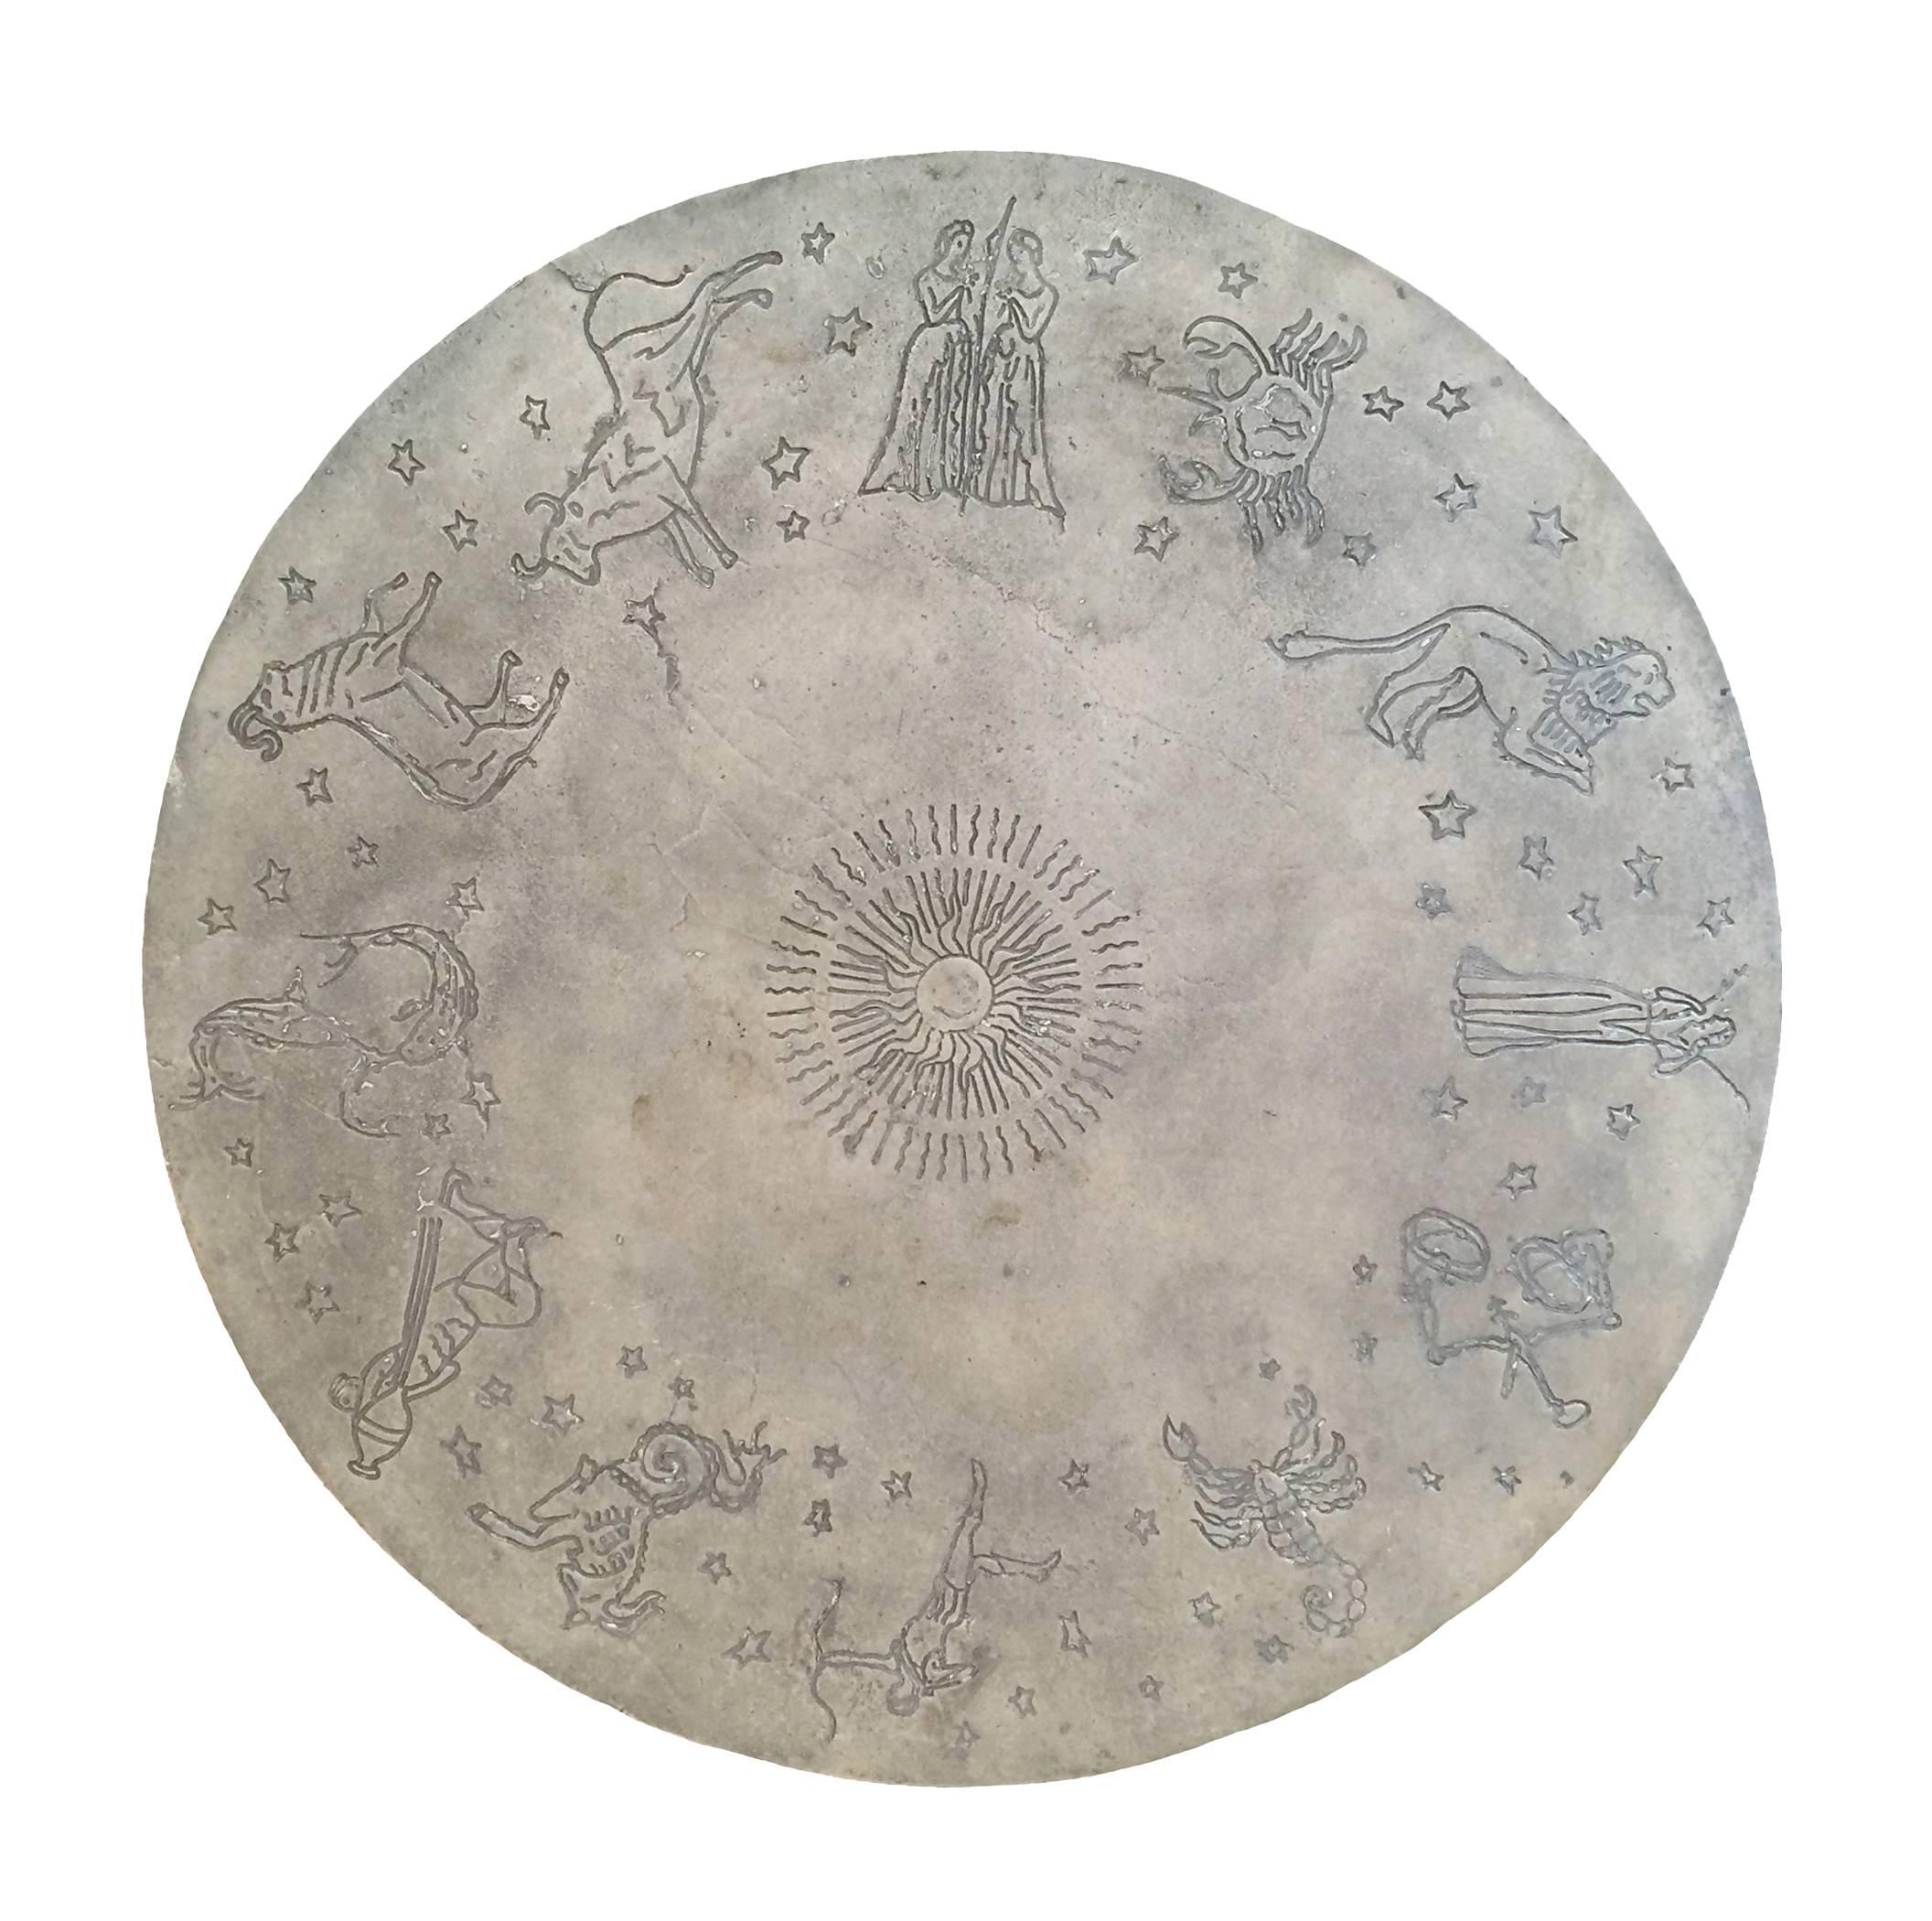 19th century French Zodiac Gueridon with scalloped border; aluminium and steel; the 12 zodiac symbols etched onto the table top creating a bit of whimsy.